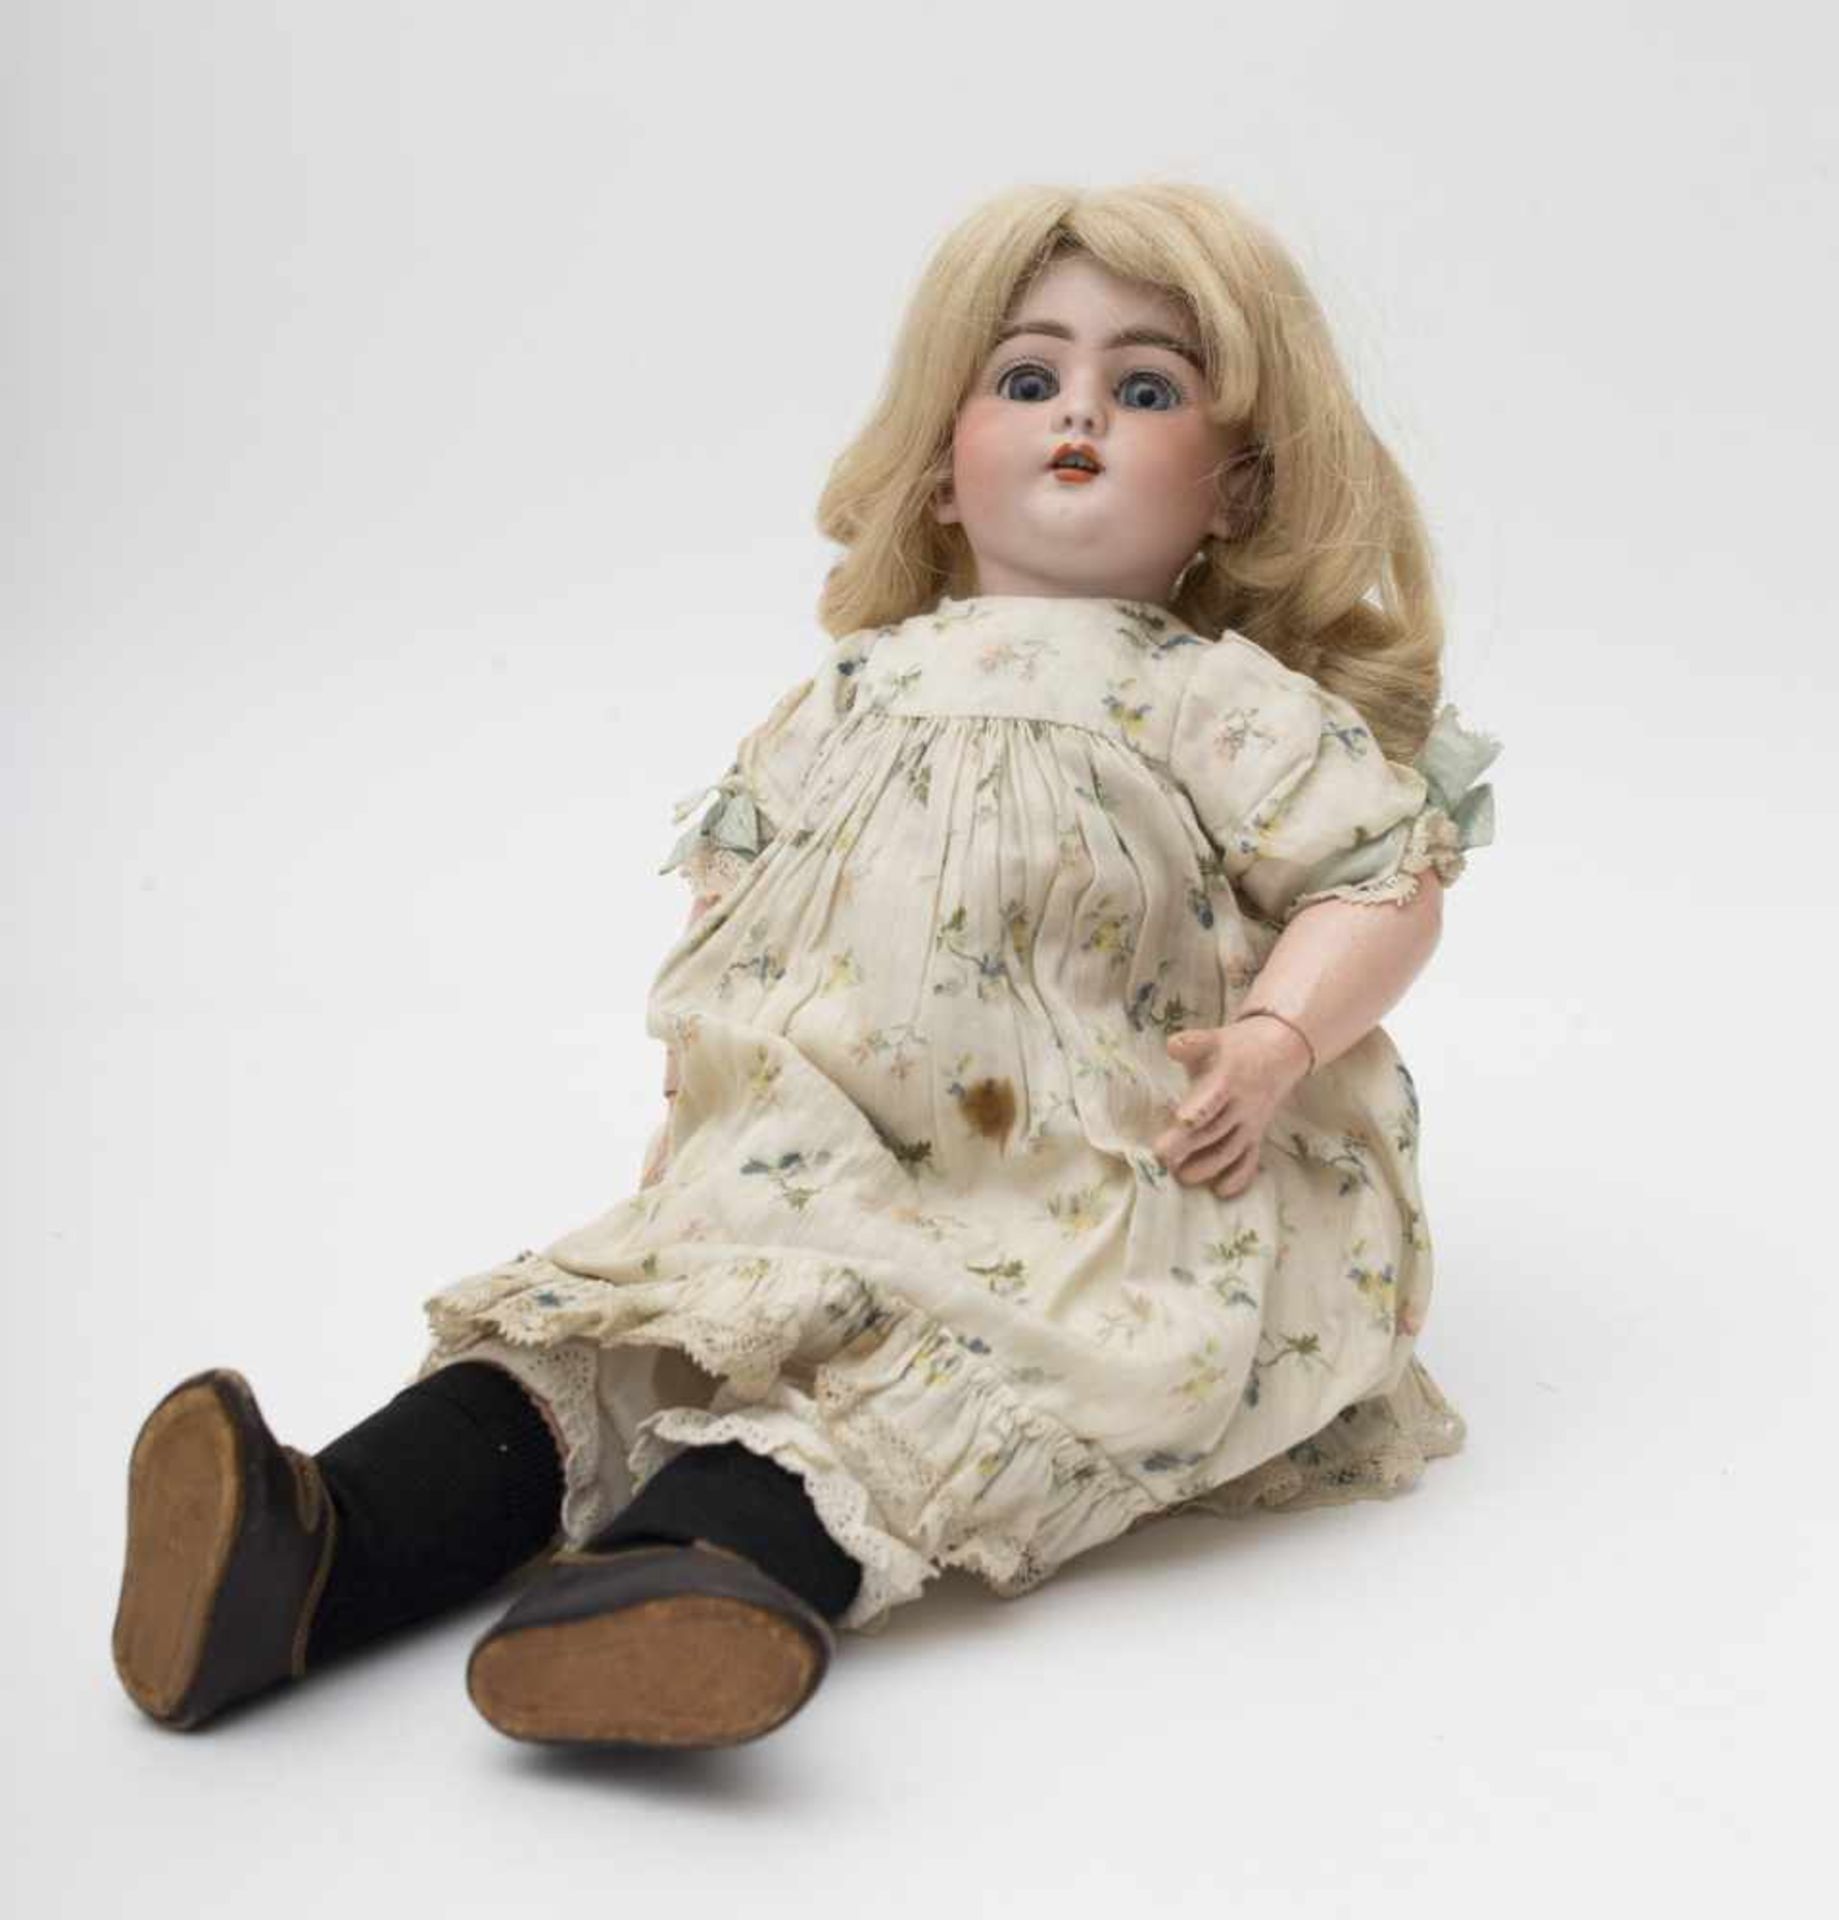 German doll With biscuit head, open mouth, branded “S & C”, size 6, blue sleeping eyes,